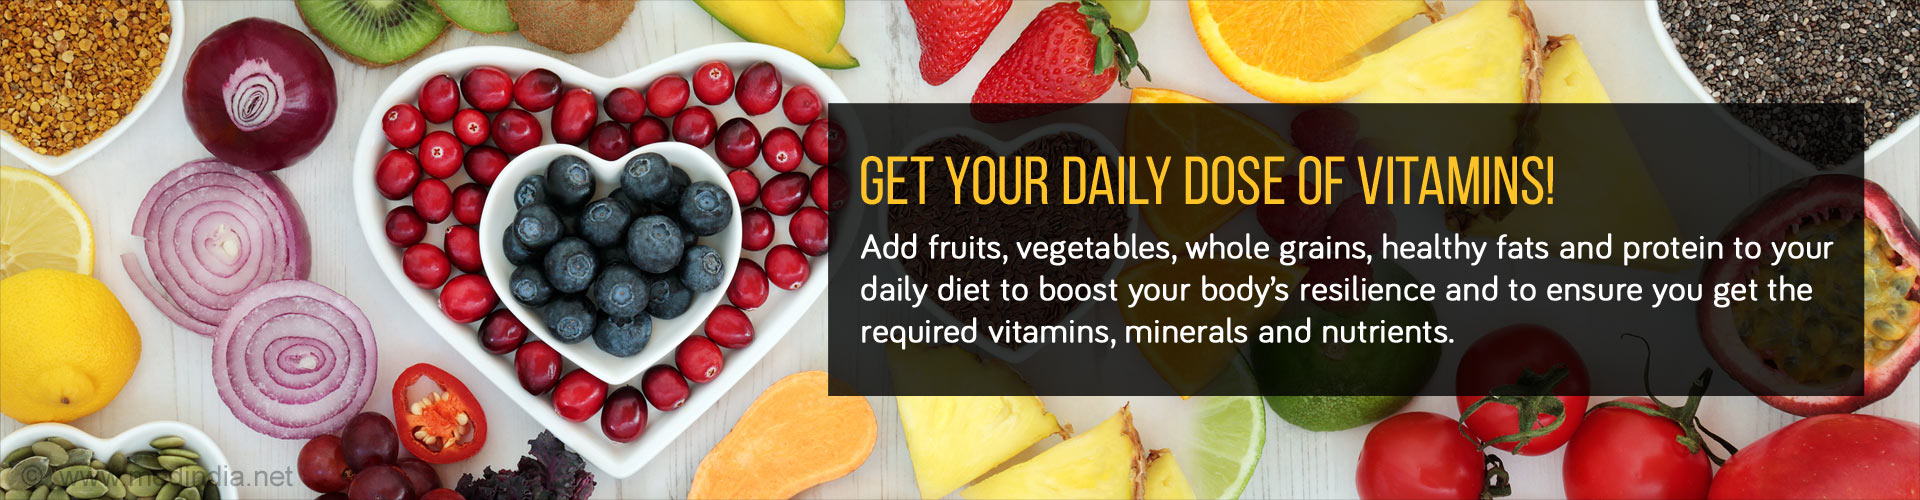 Get Your Daily Dose of Vitamins! Add fruits, vegetables, whole grains, healthy fats and protein to your daily diet to boost your body's resilience and to ensure you get the required vitamins, minerals and nutrients.